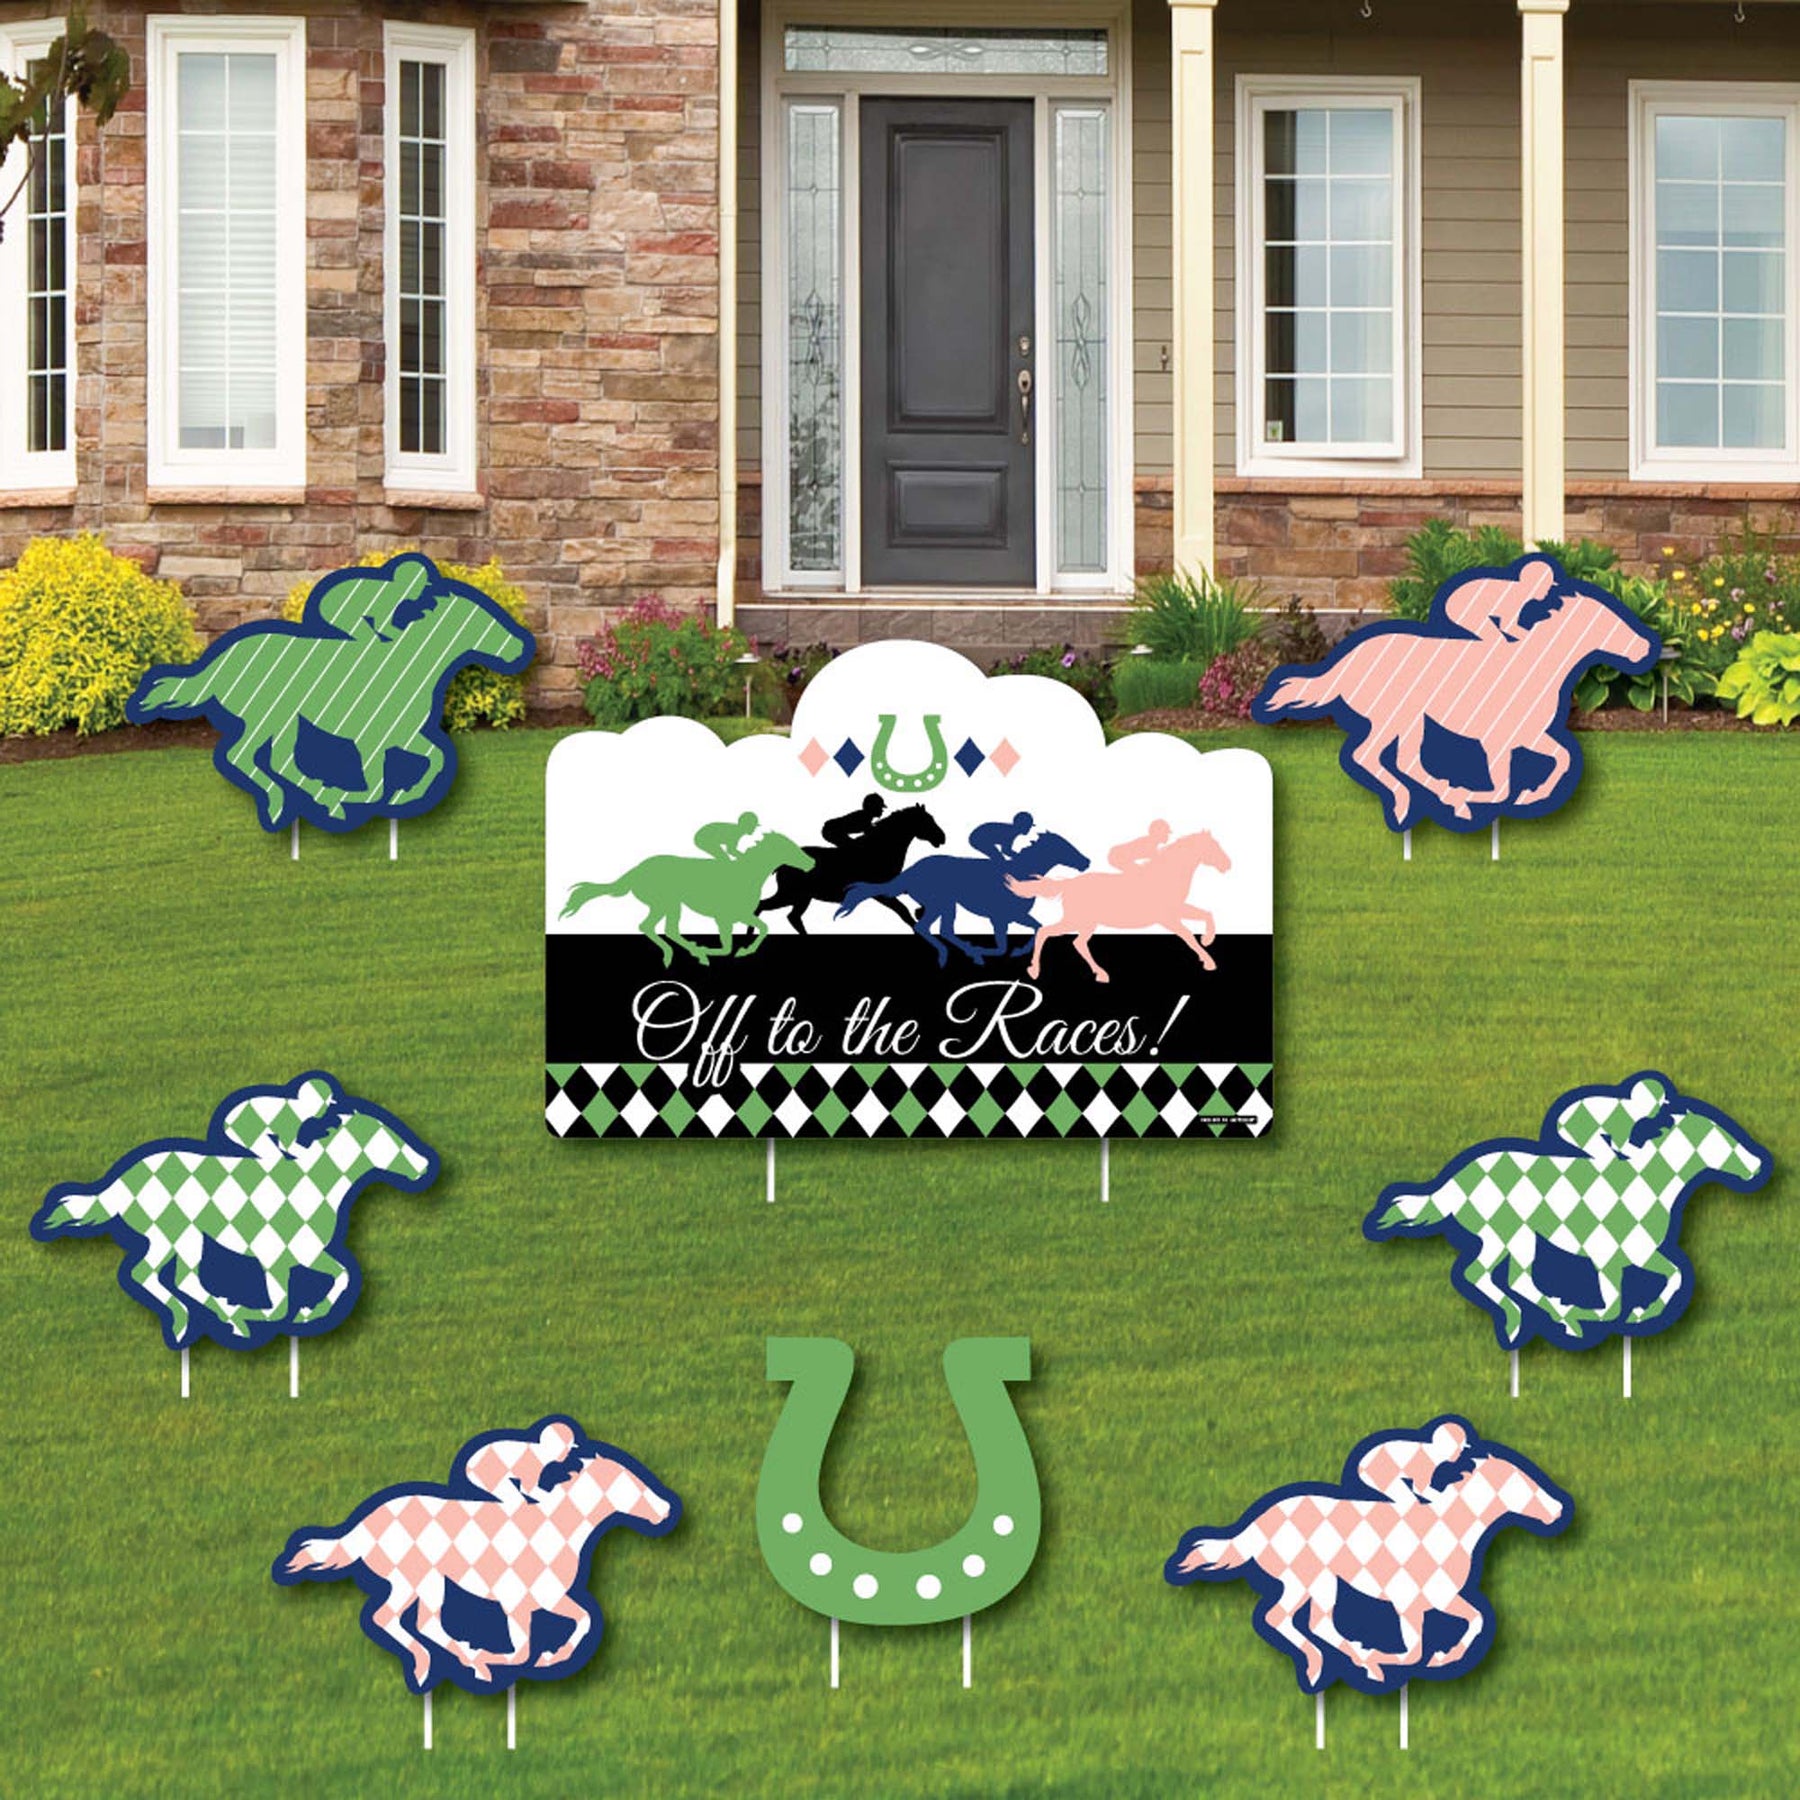  Kentucky Derby Decorations, 9 PCS Horse Racing Party